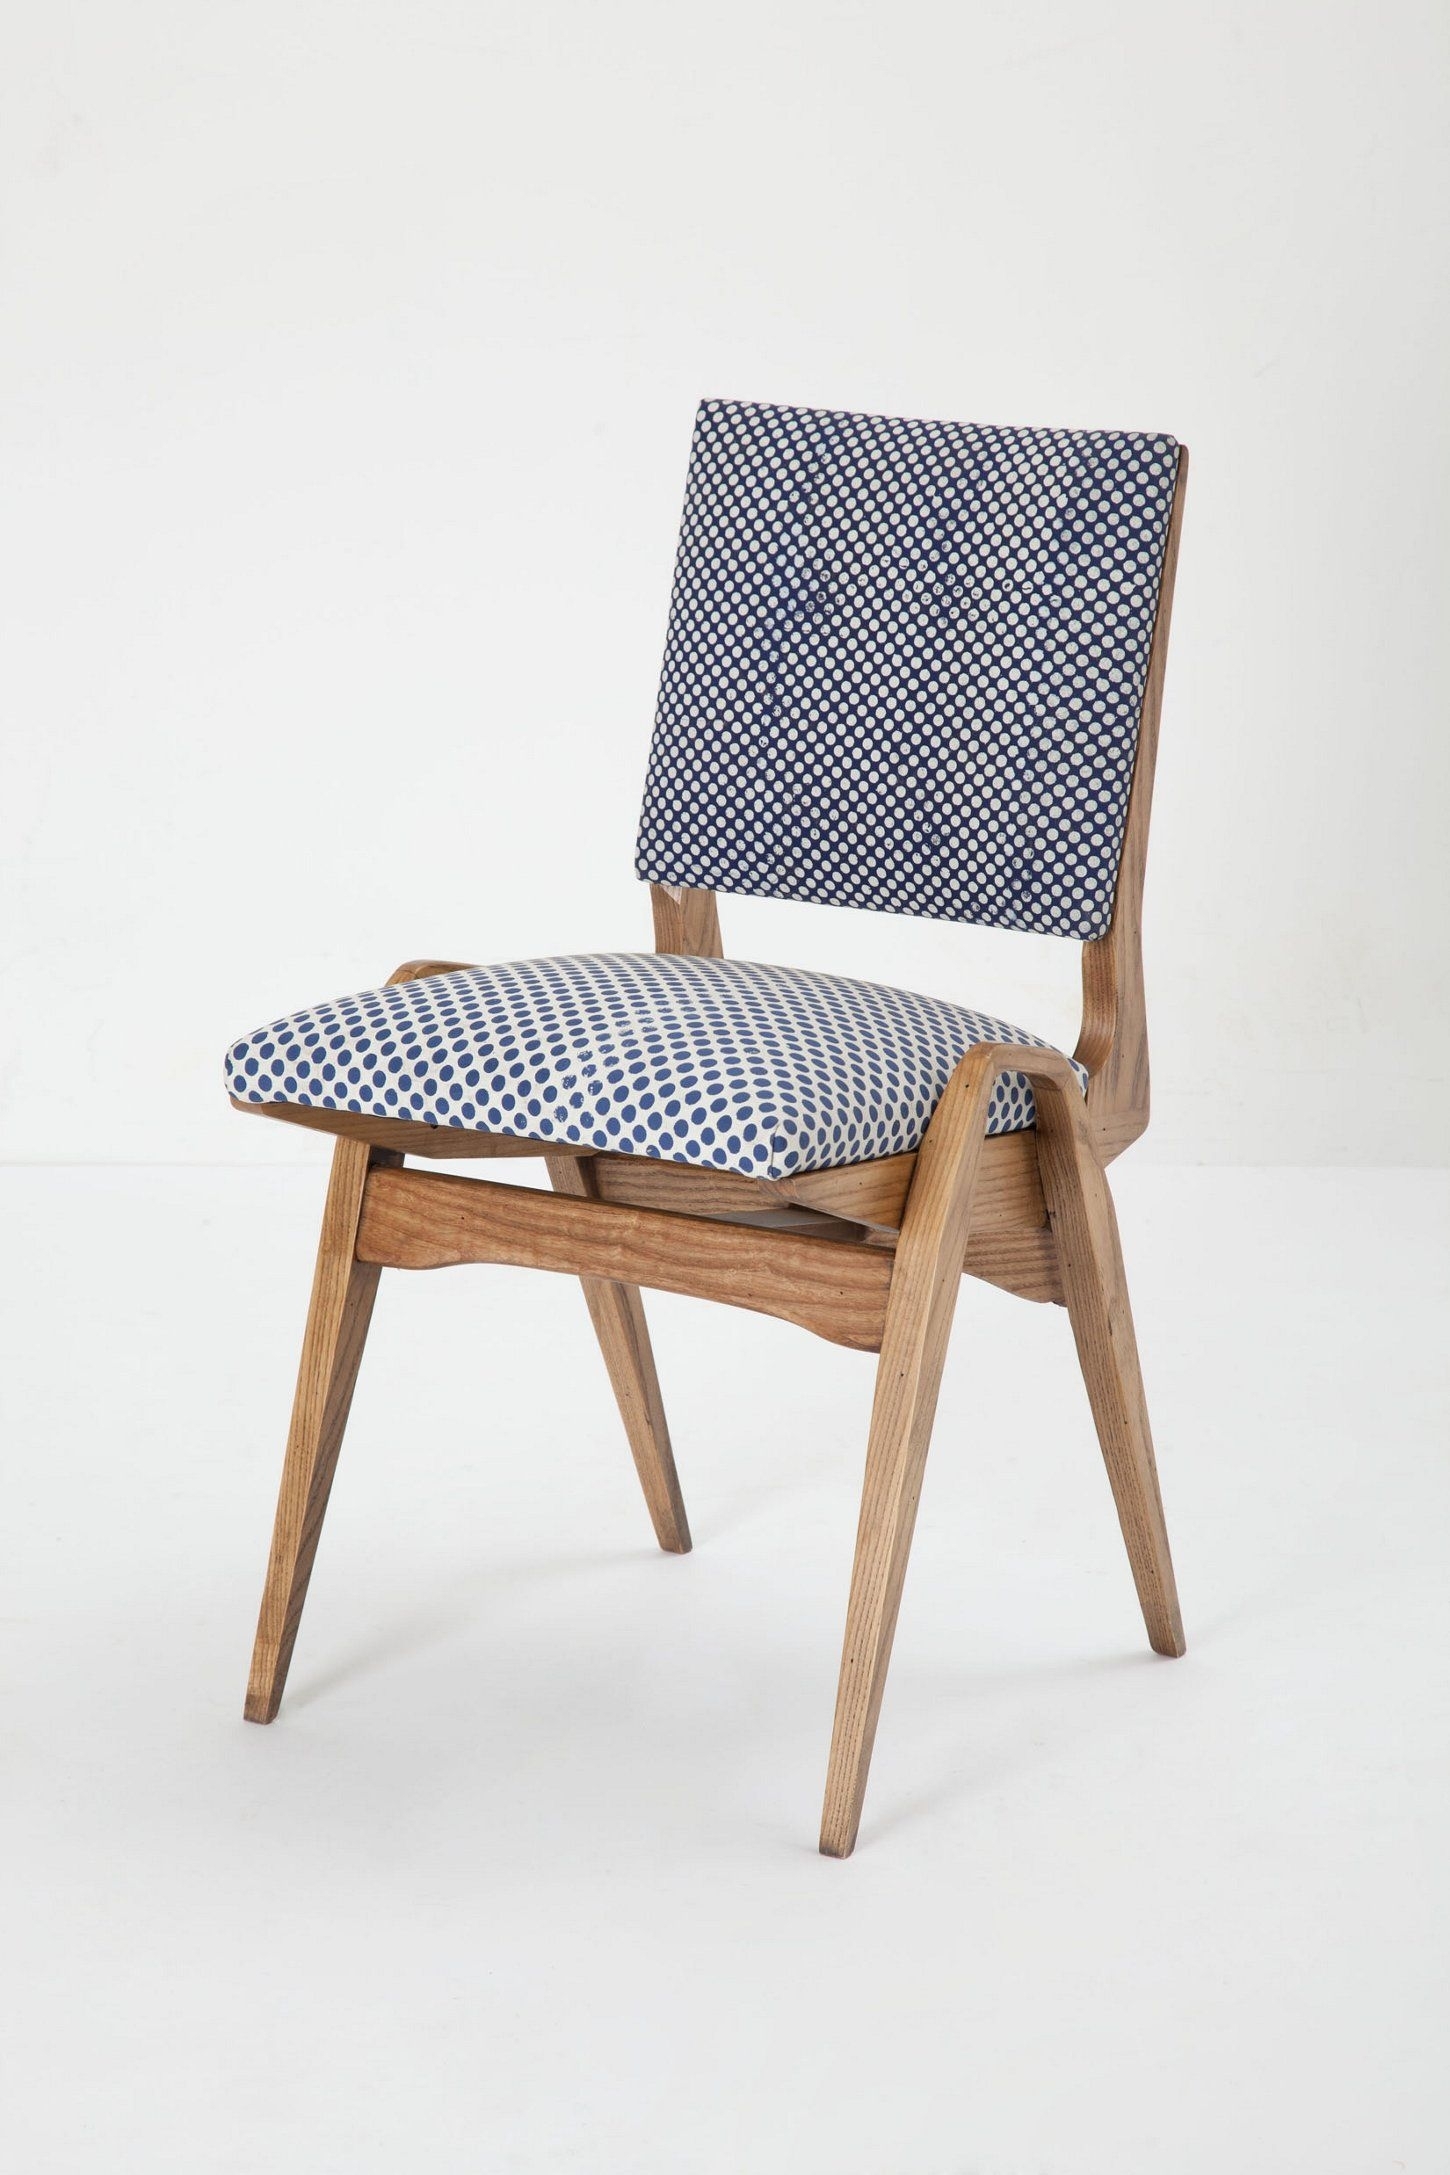 Upholstered Folding Chairs - Ideas on Foter